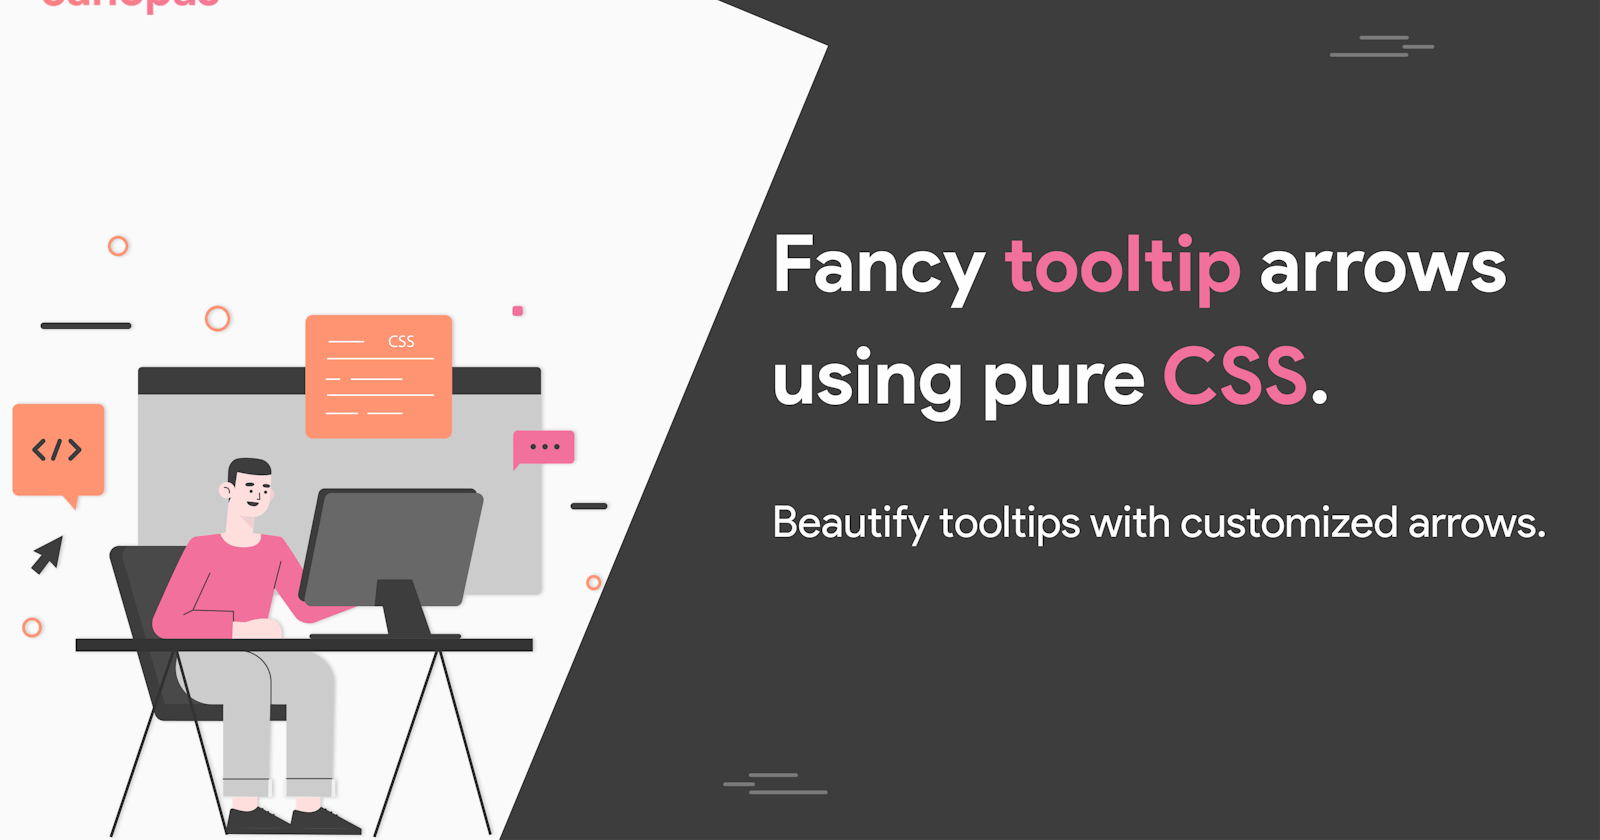 Cool tooltips designed using CSS